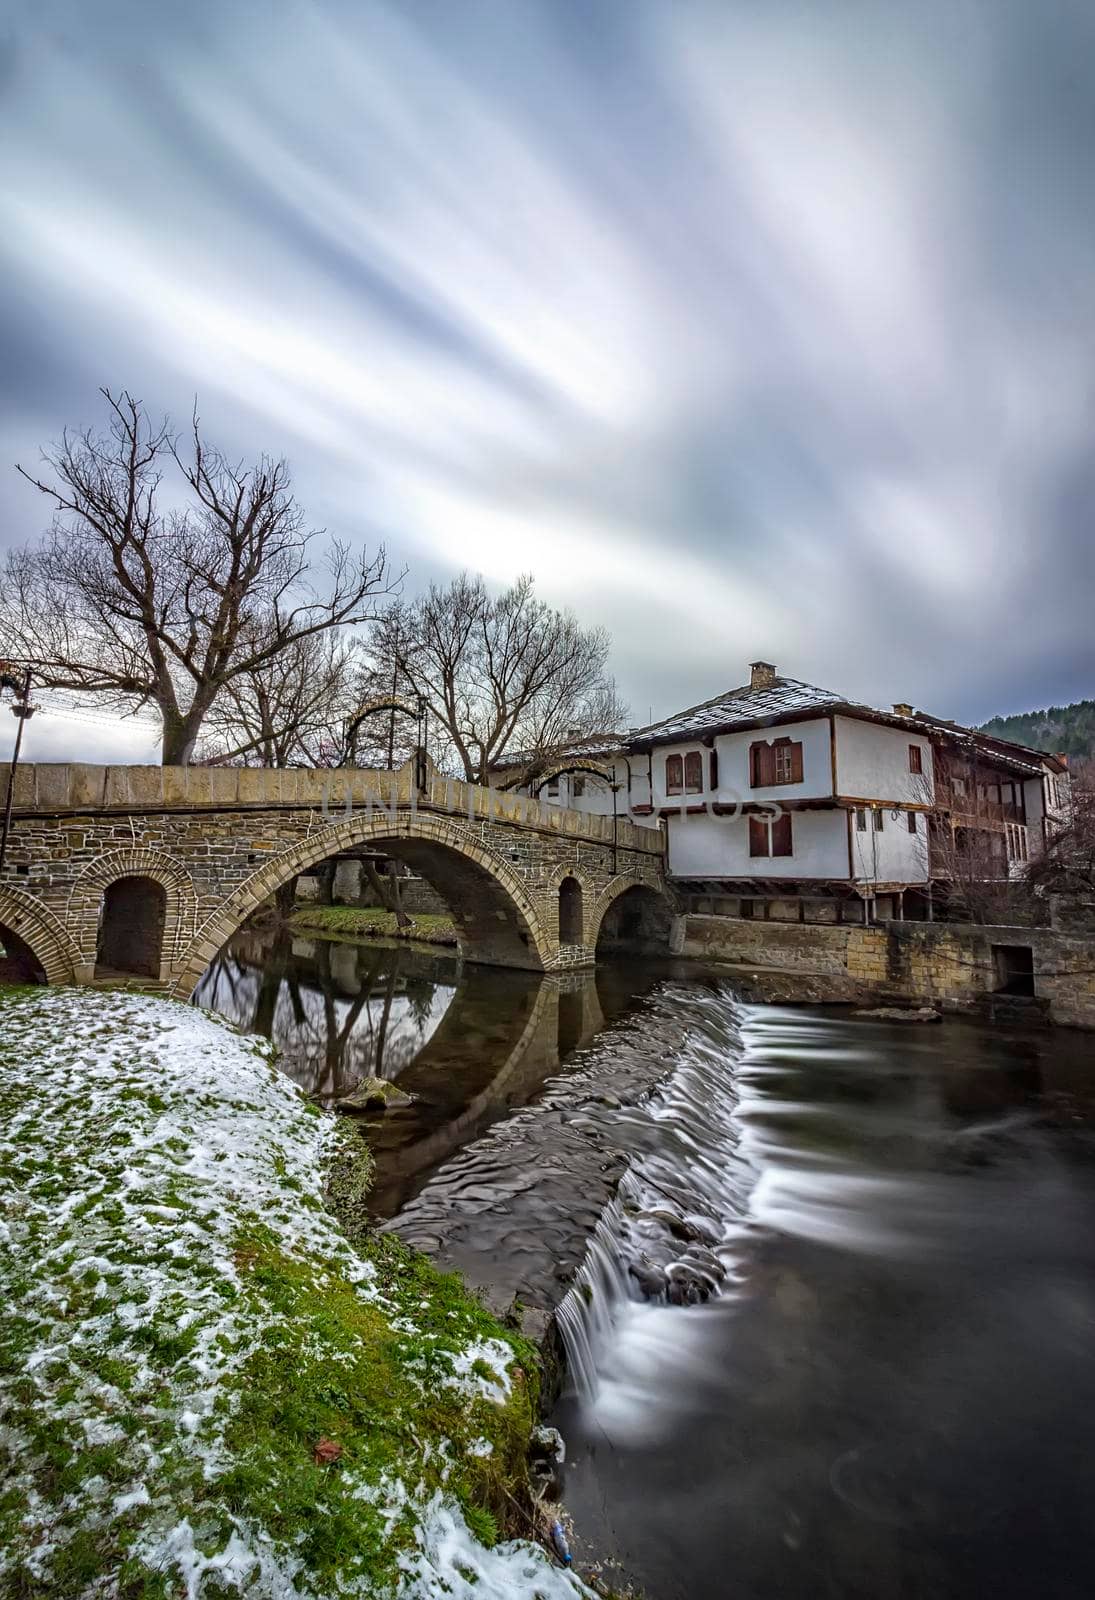 National revival bulgarian architecture. The famous bridge in the architectural complex in Tryavna, Bulgaria.